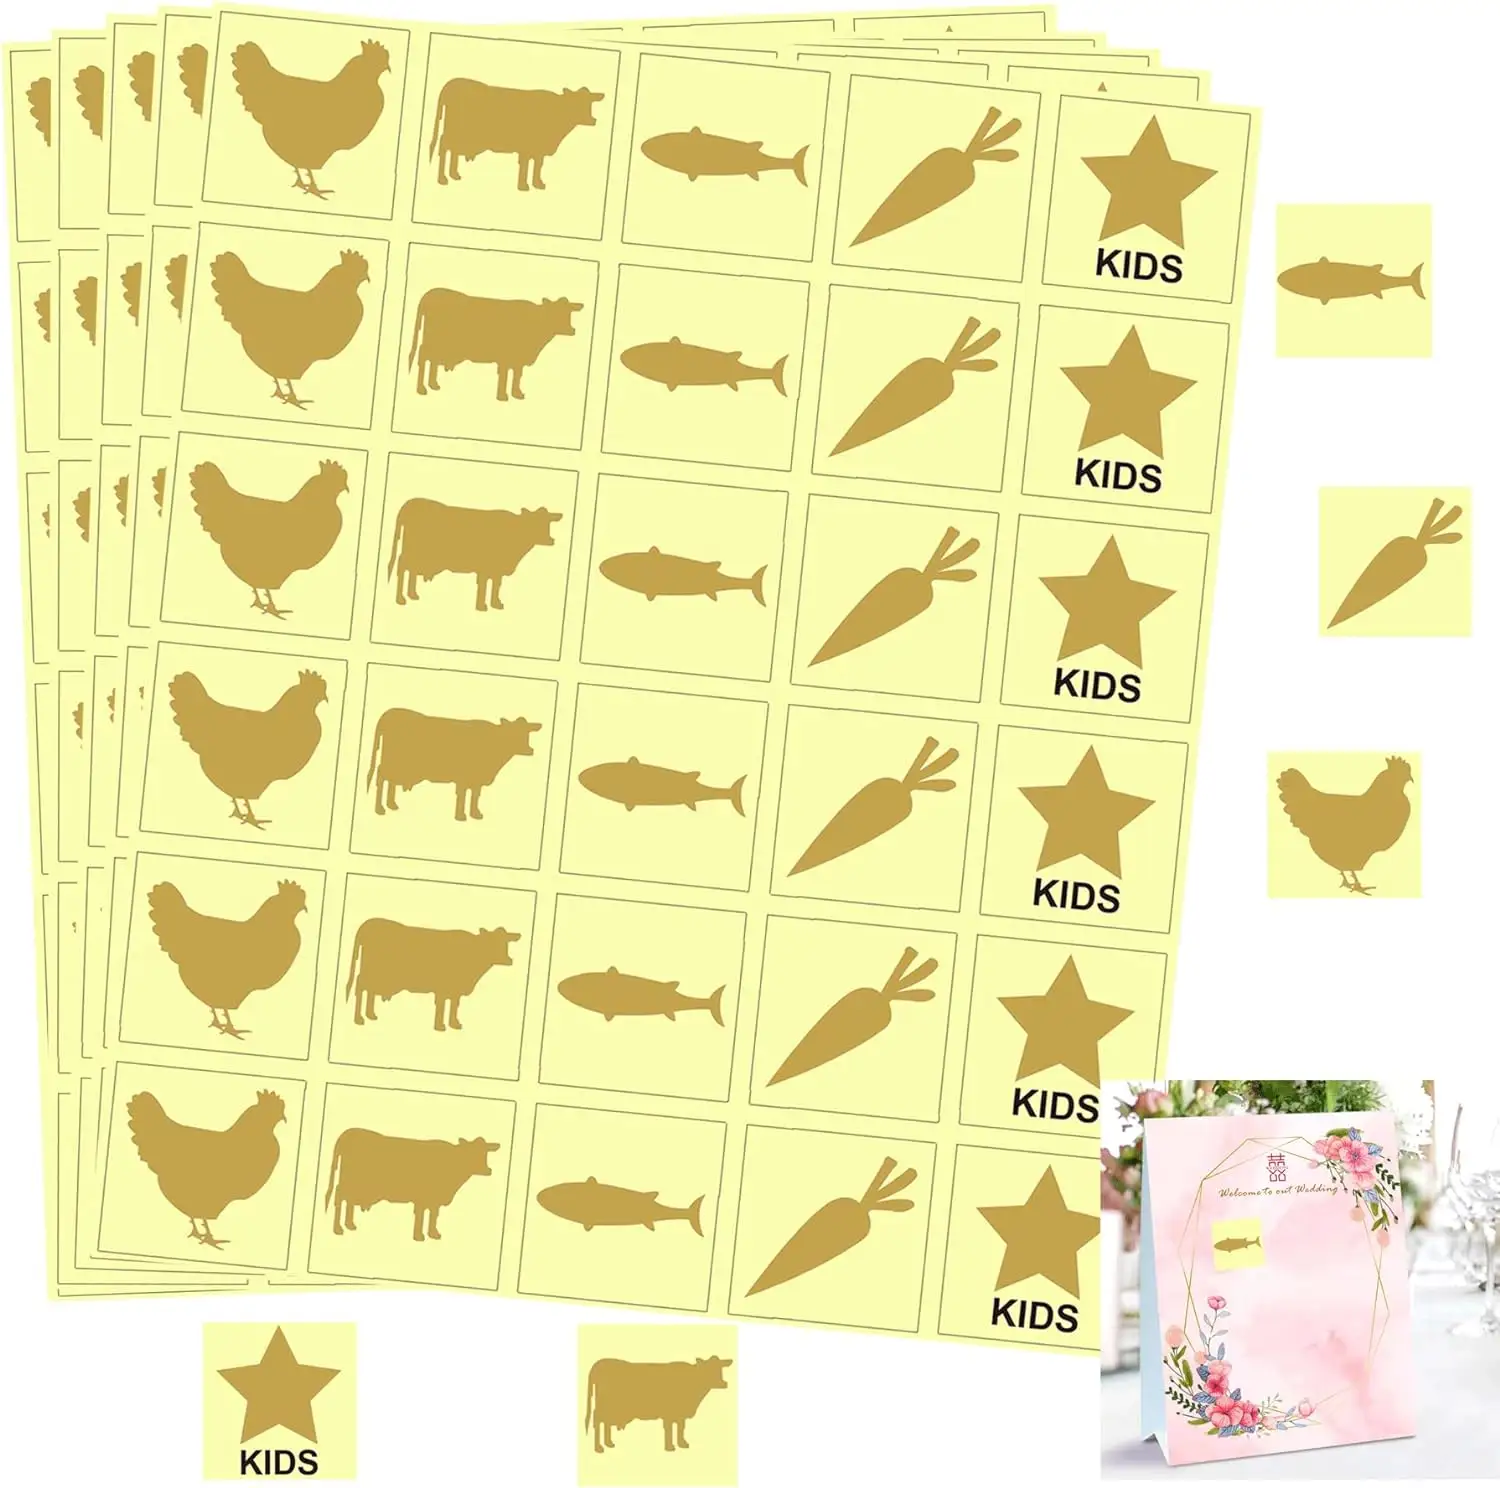 Wedding Meal Choice Wedding Meal Indicator Stickers - Beef Fish Chicken Food for Kids Place Card Menu Choices Catering Wedding